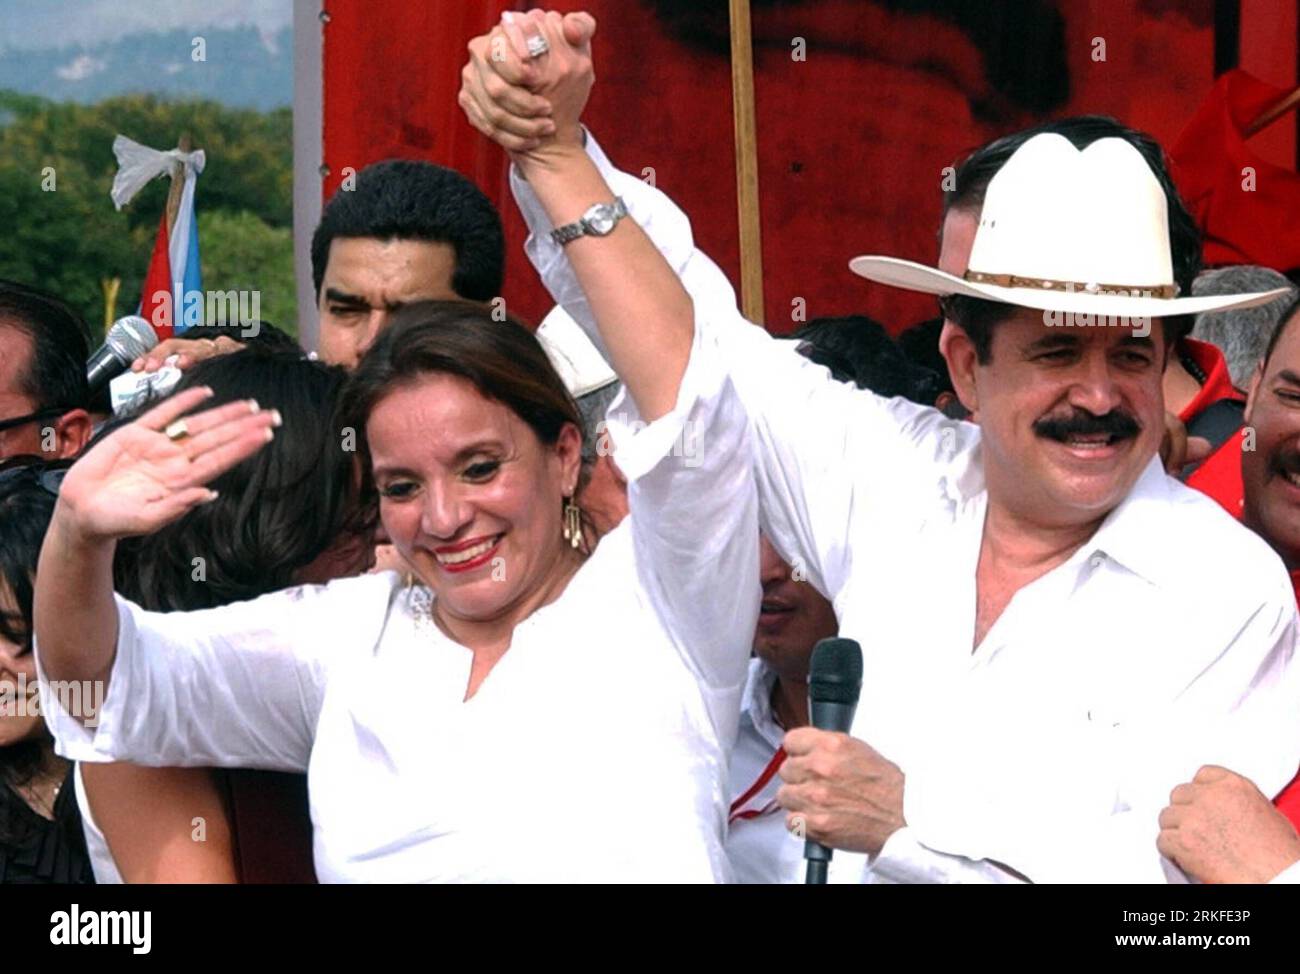 Bildnummer: 55407804  Datum: 28.05.2011  Copyright: imago/Xinhua (110528) -- TEGUCIGALPA, May 28, 2011 (Xinhua) -- Deposed Honduran President Manuel Zelaya (R), and his wife Xiomara Castro de Zelaya (L), raise their hands, after speaking to his supportes, upon his arrival to Tegucigalpa, capital of Honduras, on May 28, 2011. Zelaya returned to his country after the June 2009 coup. (Xinhua/Jorge Pineda) (ce)   HONDURAS-TEGUCIGALPA-POLITICS-MANUEL ZELAYA PUBLICATIONxNOTxINxCHN People Politik kbdig xkg 2011 quer Aufmacher o0 Familie, Frau, Rückkehr    Bildnummer 55407804 Date 28 05 2011 Copyright Stock Photo